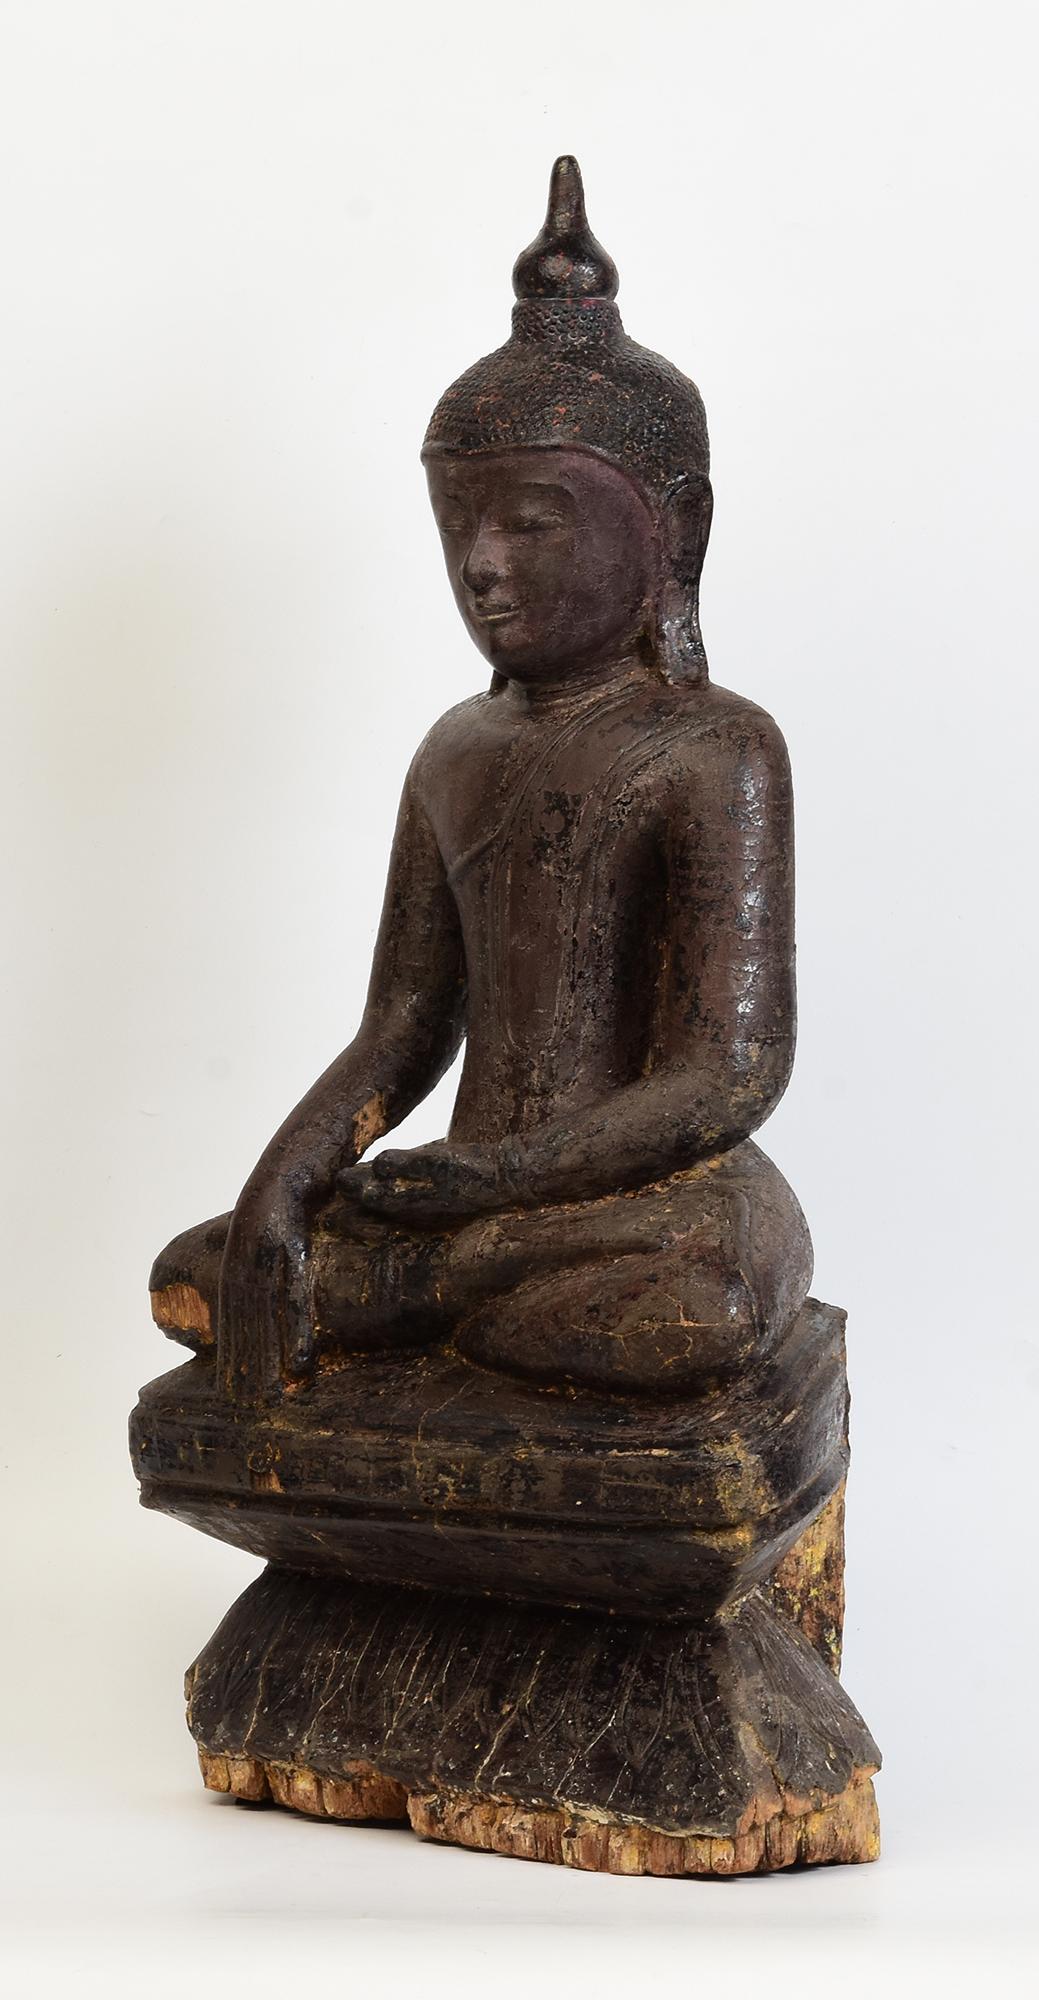 16th Century, Ava, Antique Burmese Wooden Seated Buddha Statue For Sale 1